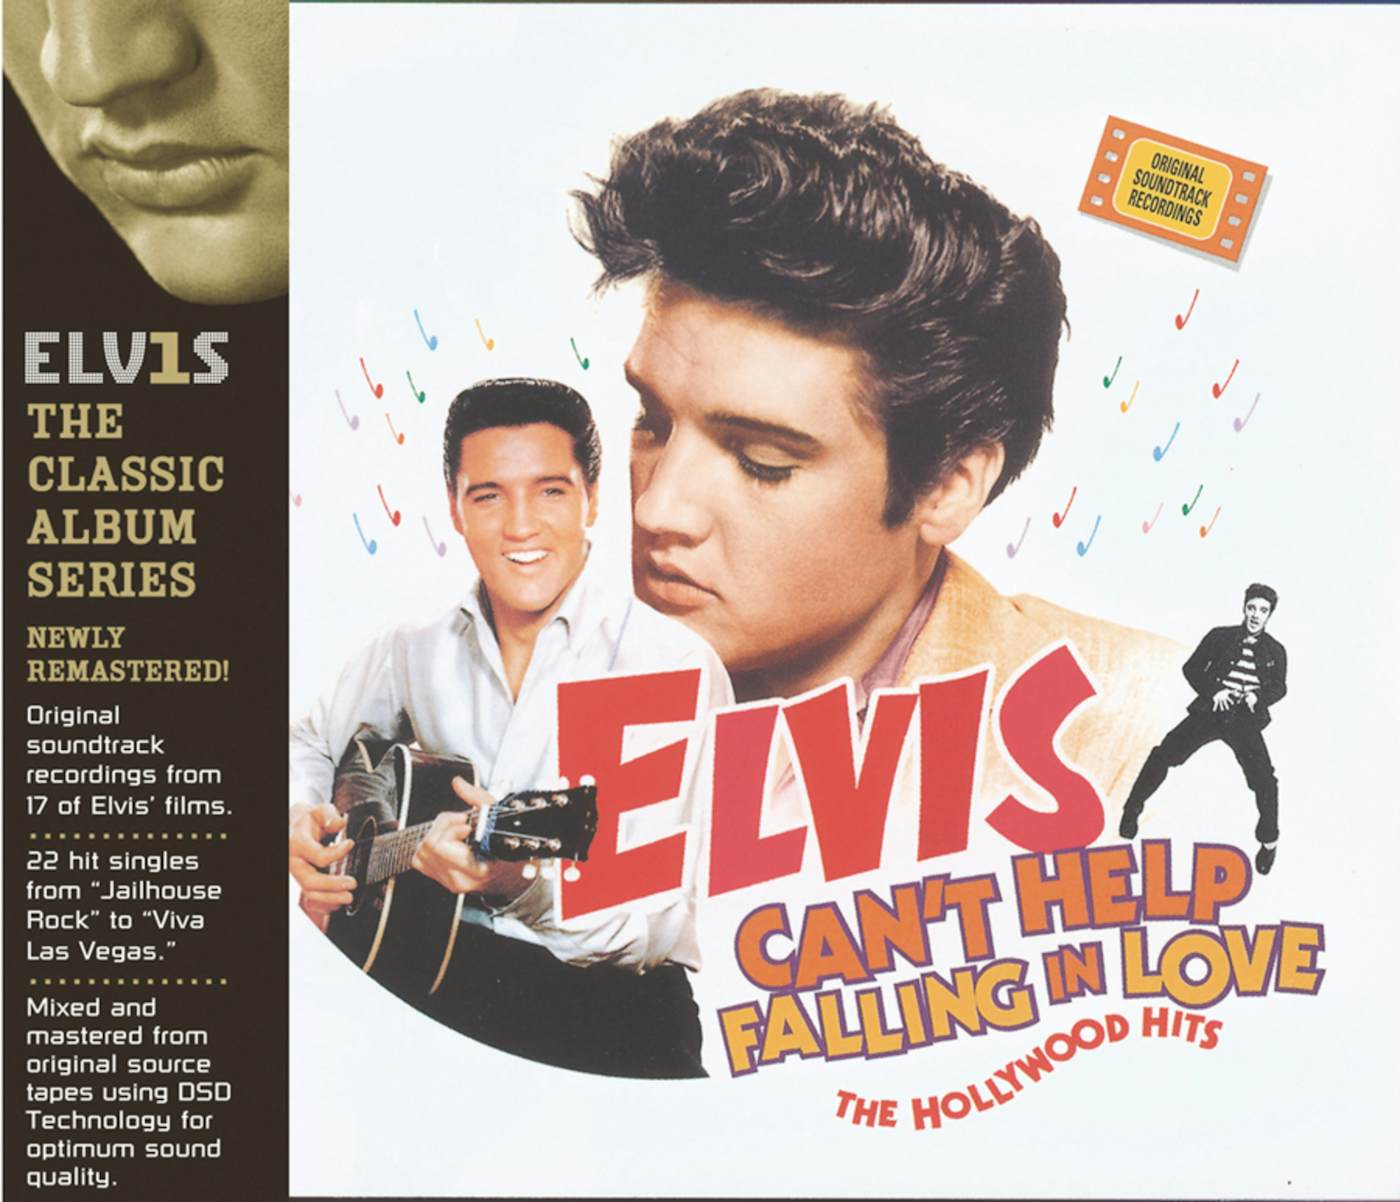 Elvis Presley CAN'T HELP FALLING IN LOVE: THE HOLLYWOOD HITS CD